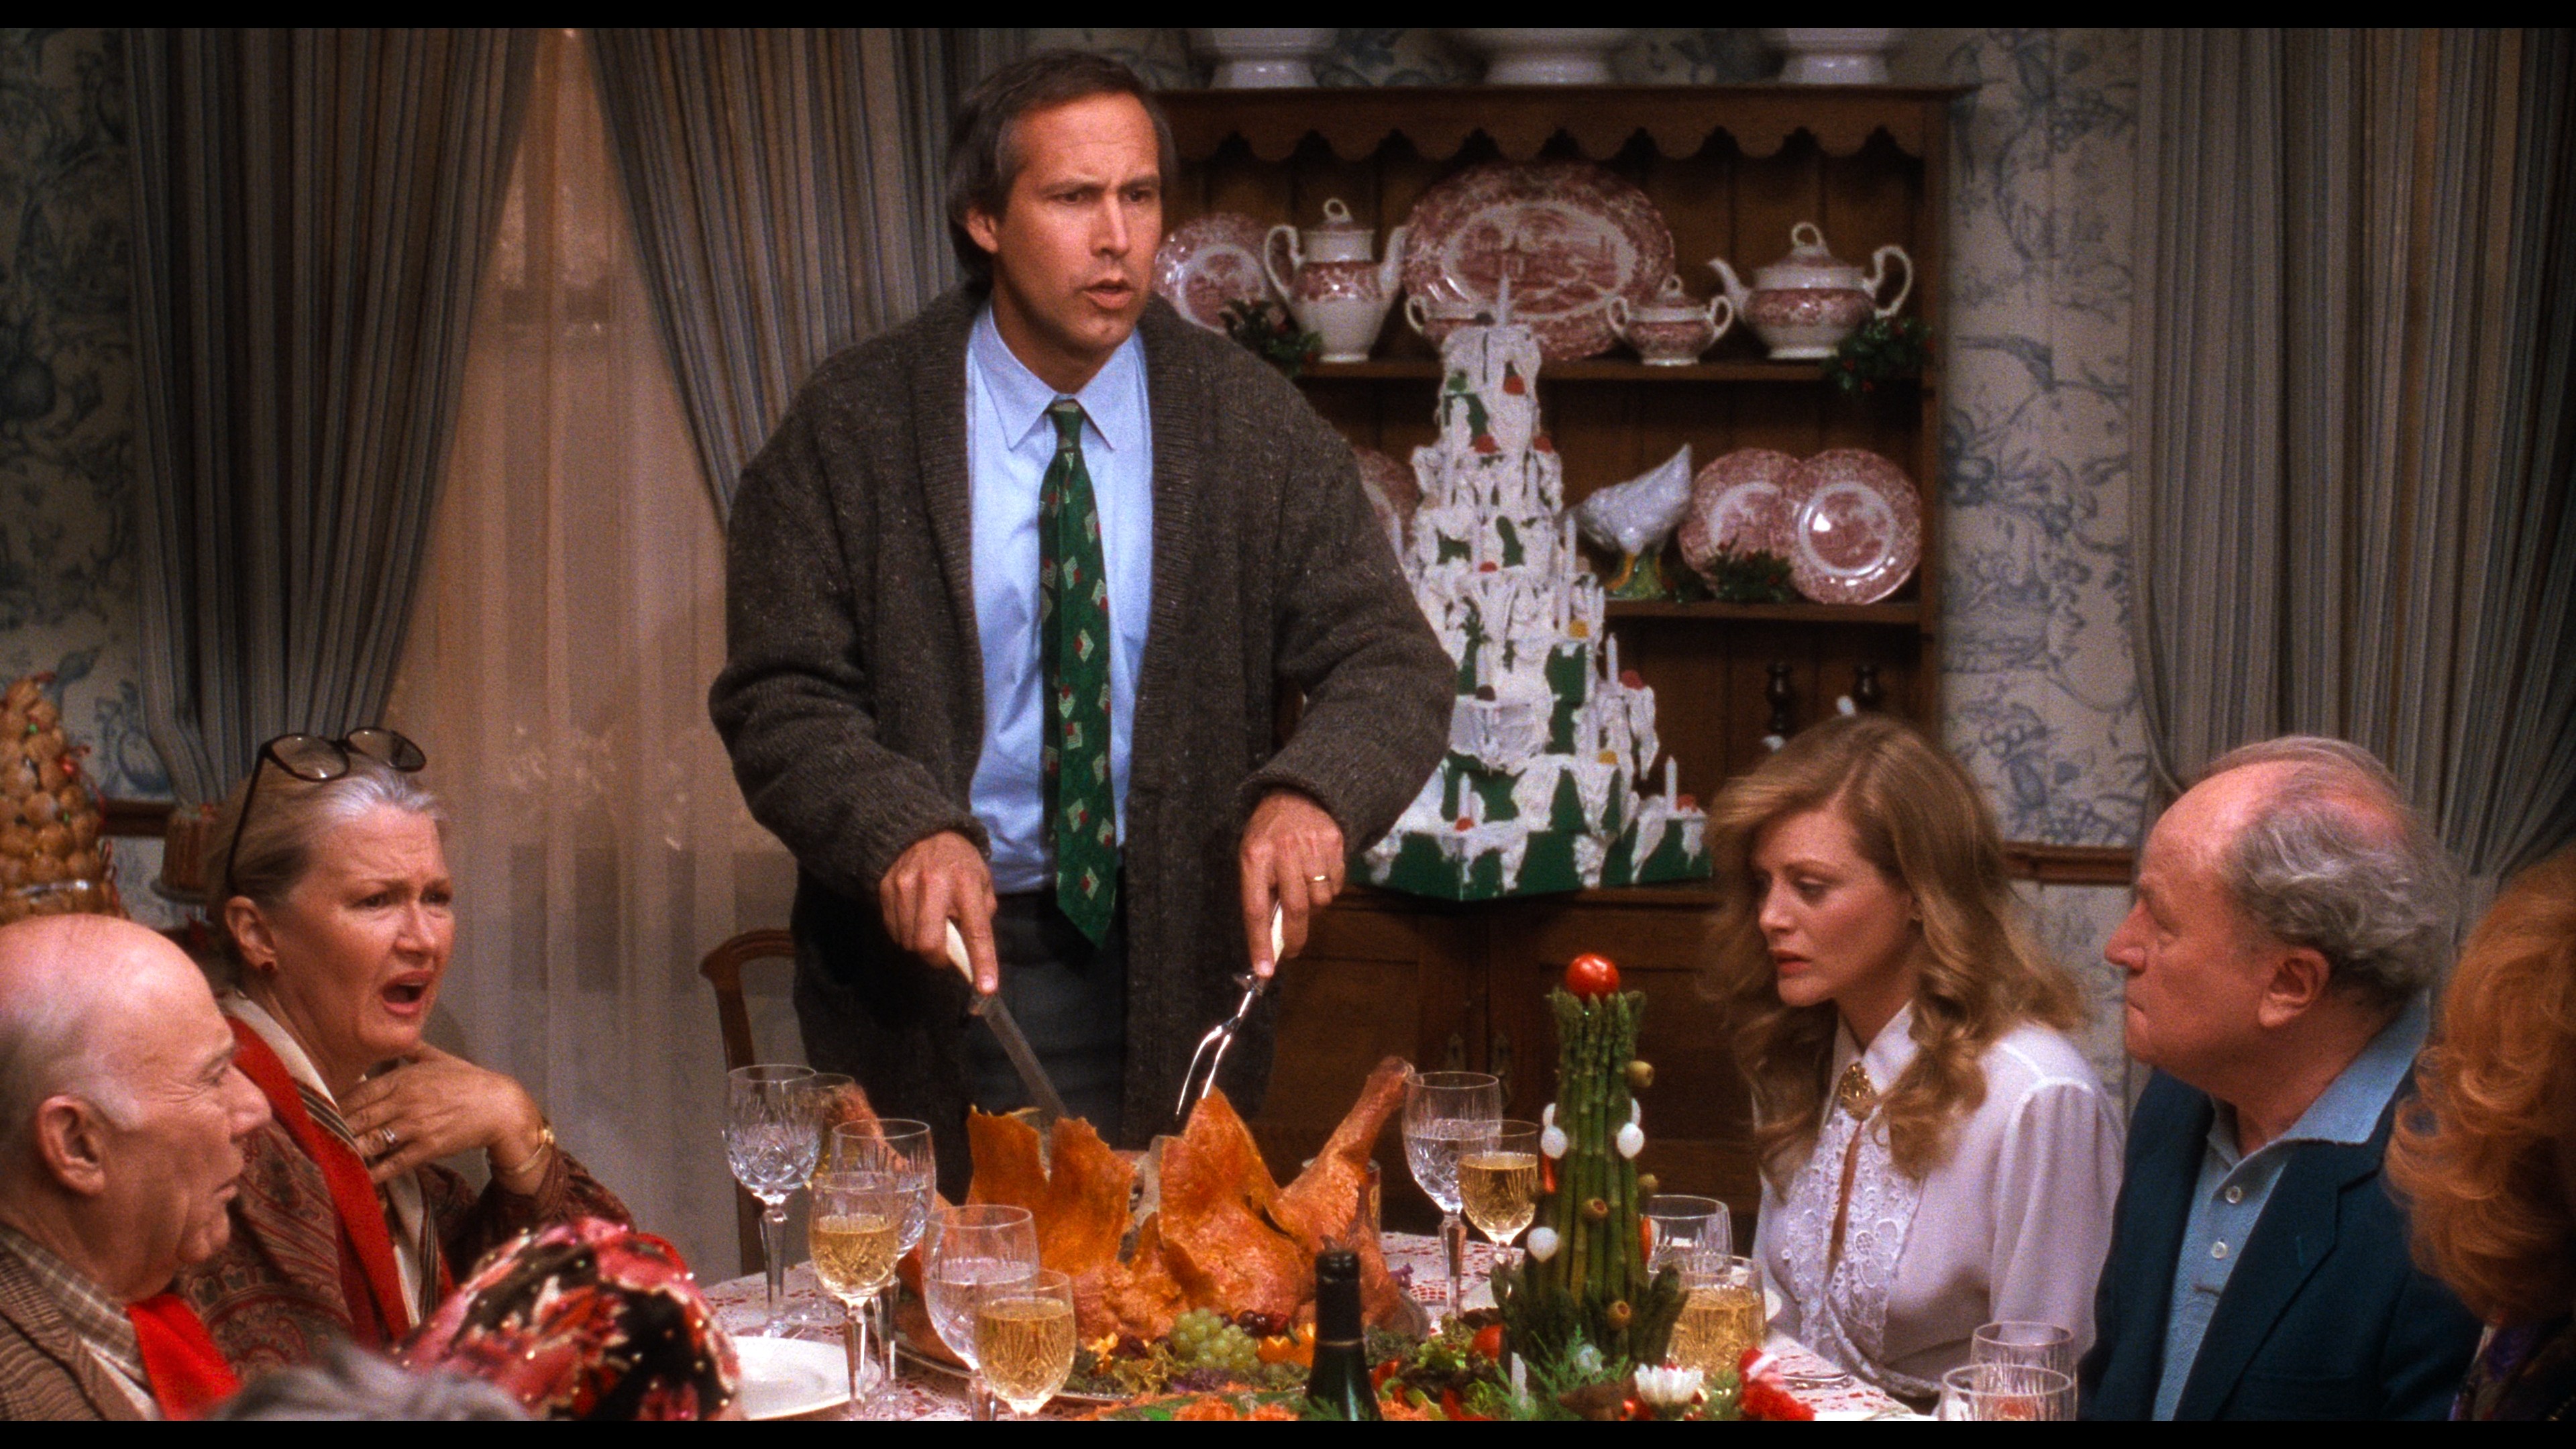 4K Review  National Lampoon's Christmas Vacation (Ultra HD 4K Blu